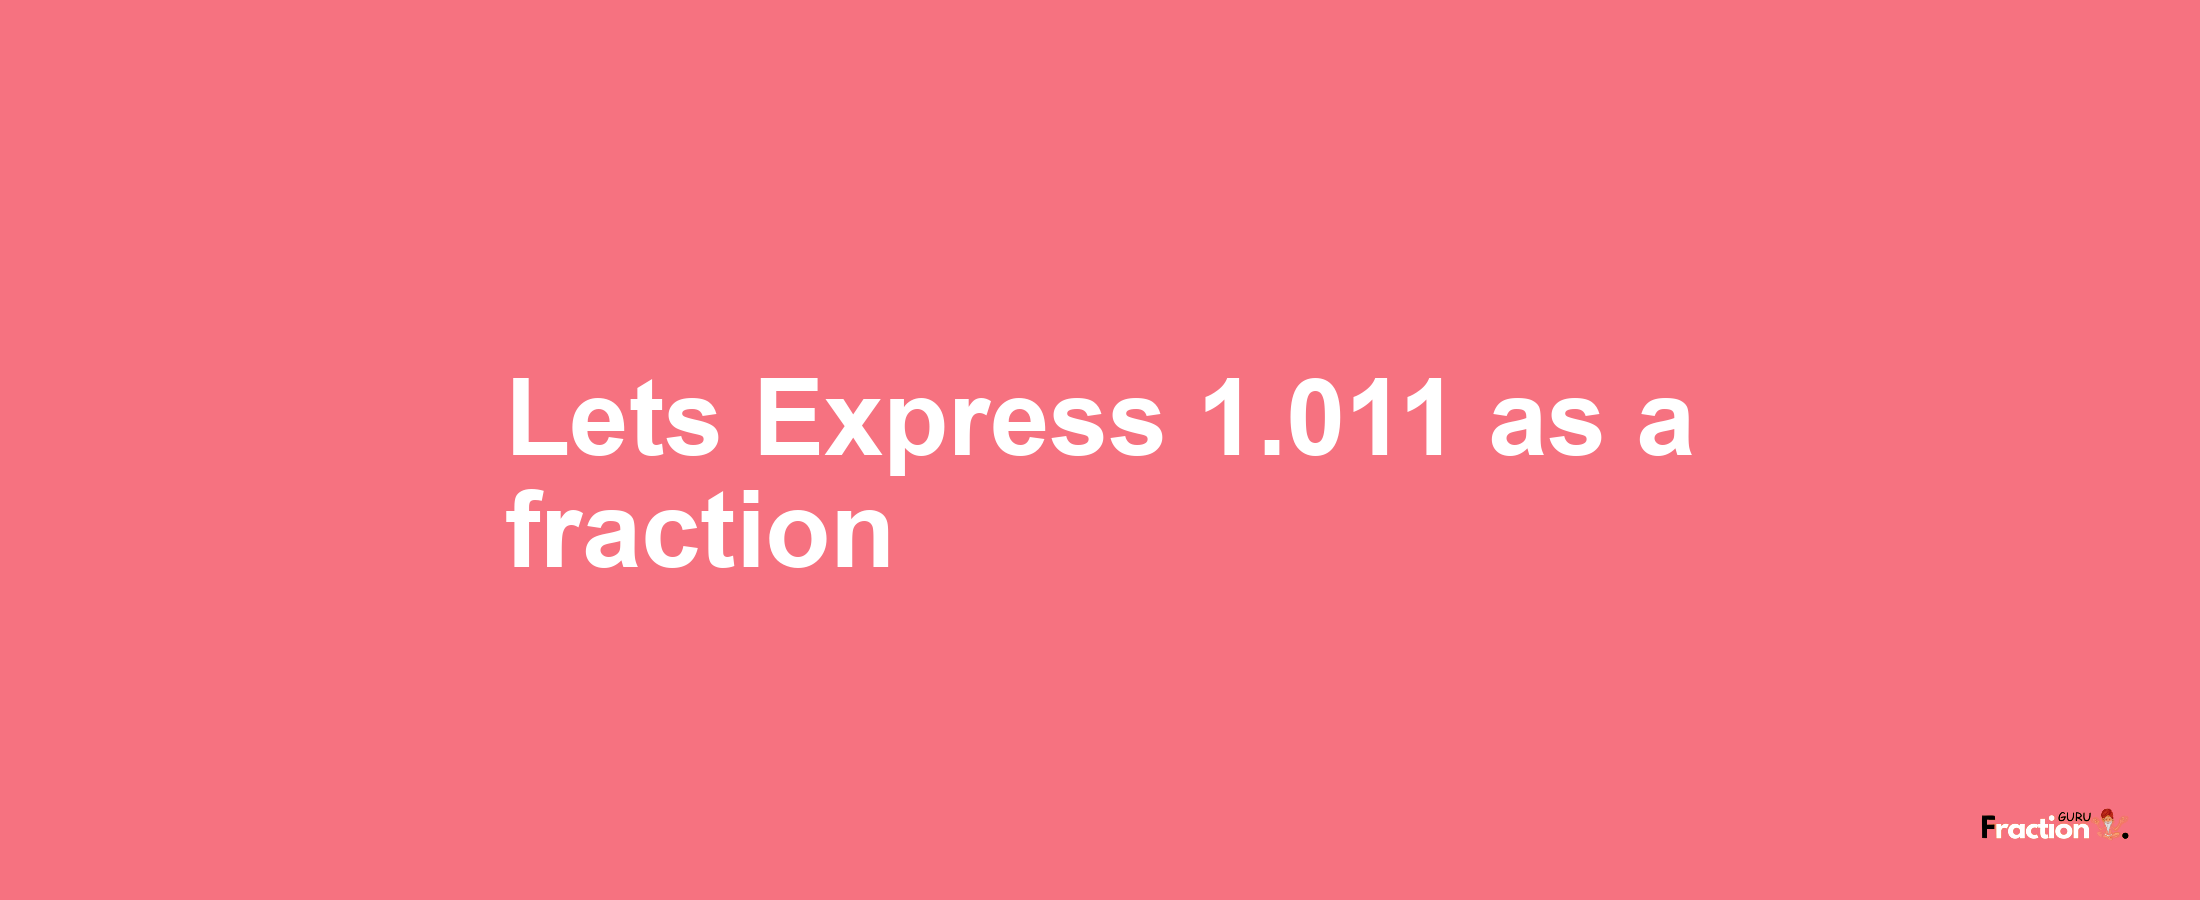 Lets Express 1.011 as afraction